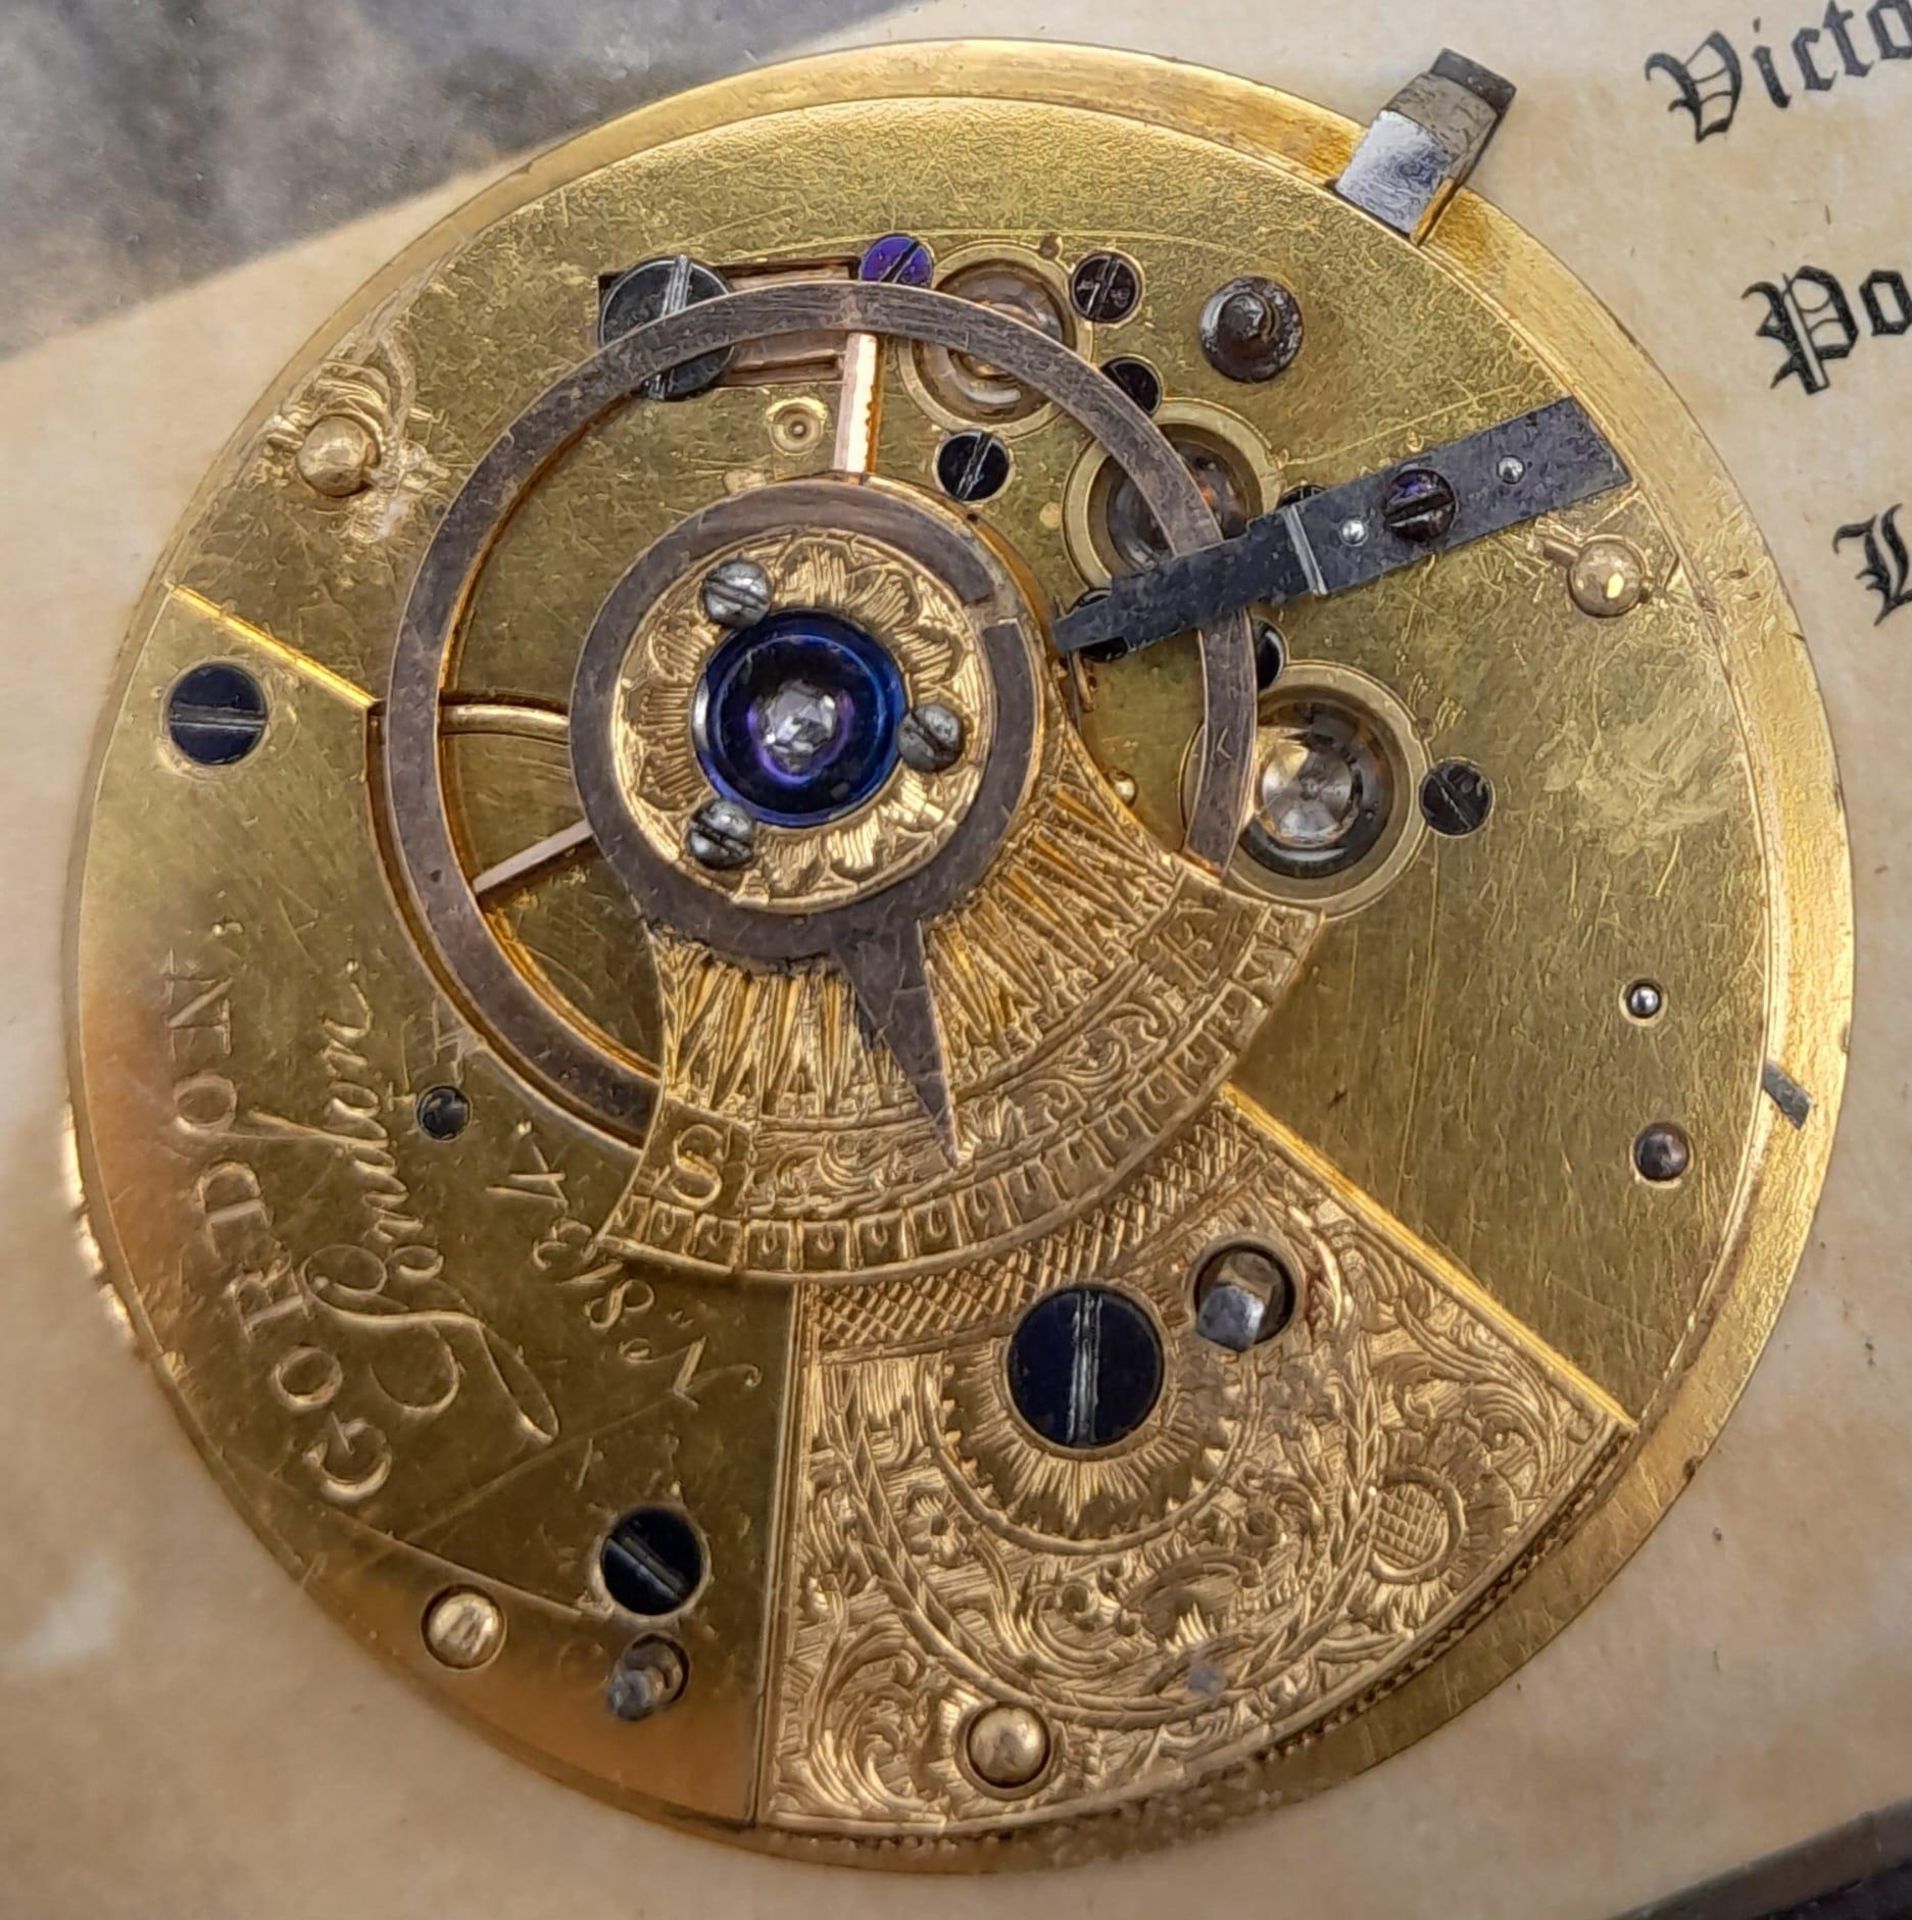 From the Blyth Collection - A Unique Hand-Made Horologist's Art-Piece. A Framed Victorian Fusee - Image 2 of 4